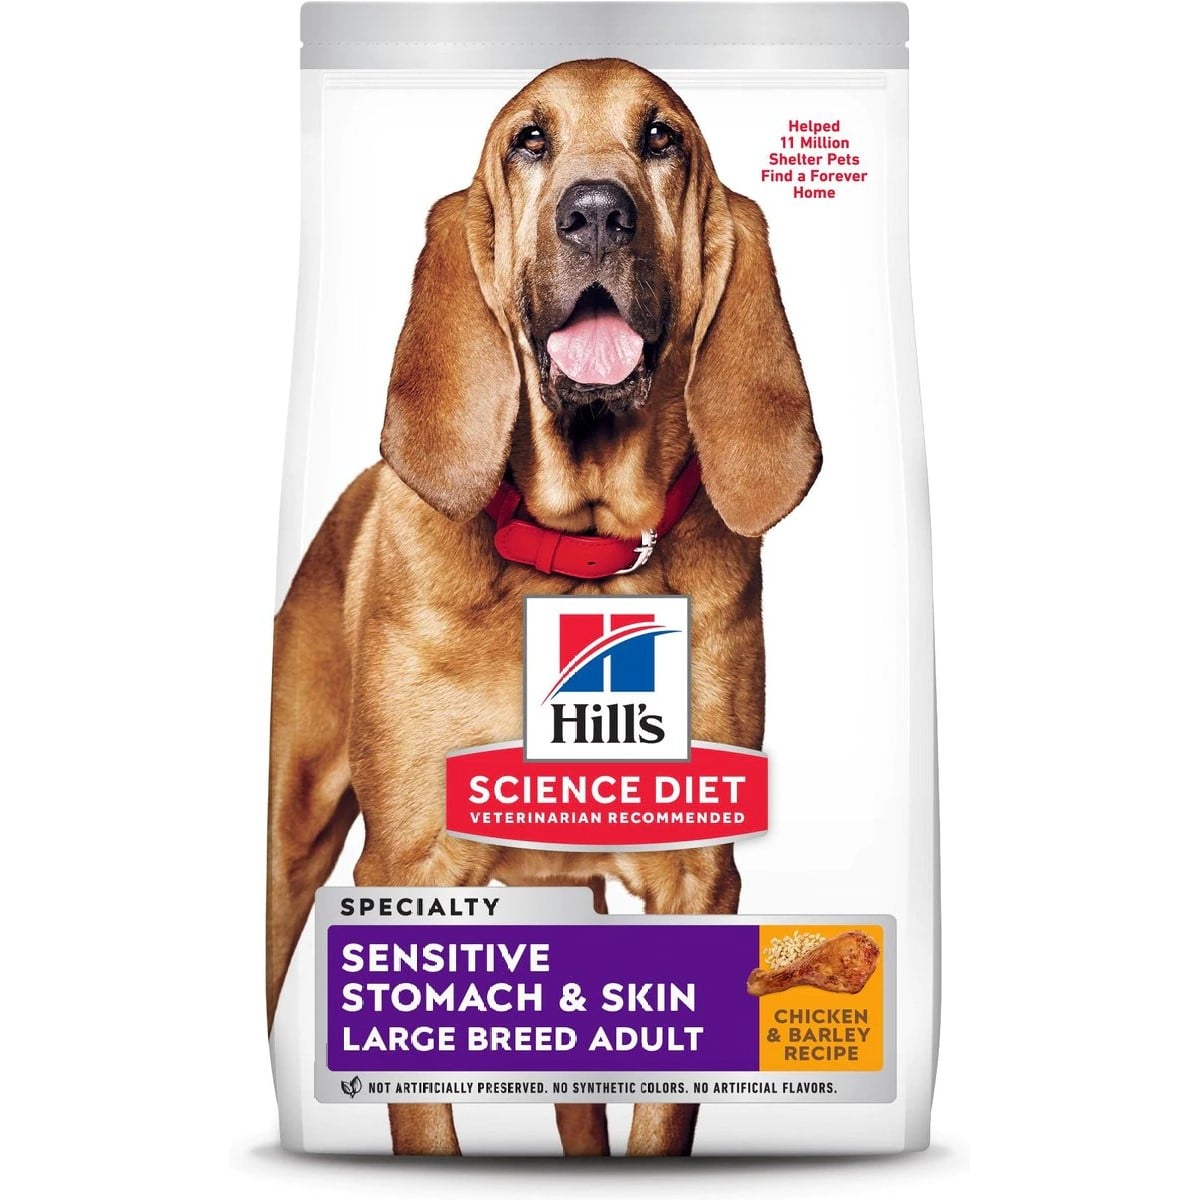 Hill's Science Diet Adult Sensitive Stomach & Skin Large Breed Dry Dog Food, Chicken Recipe